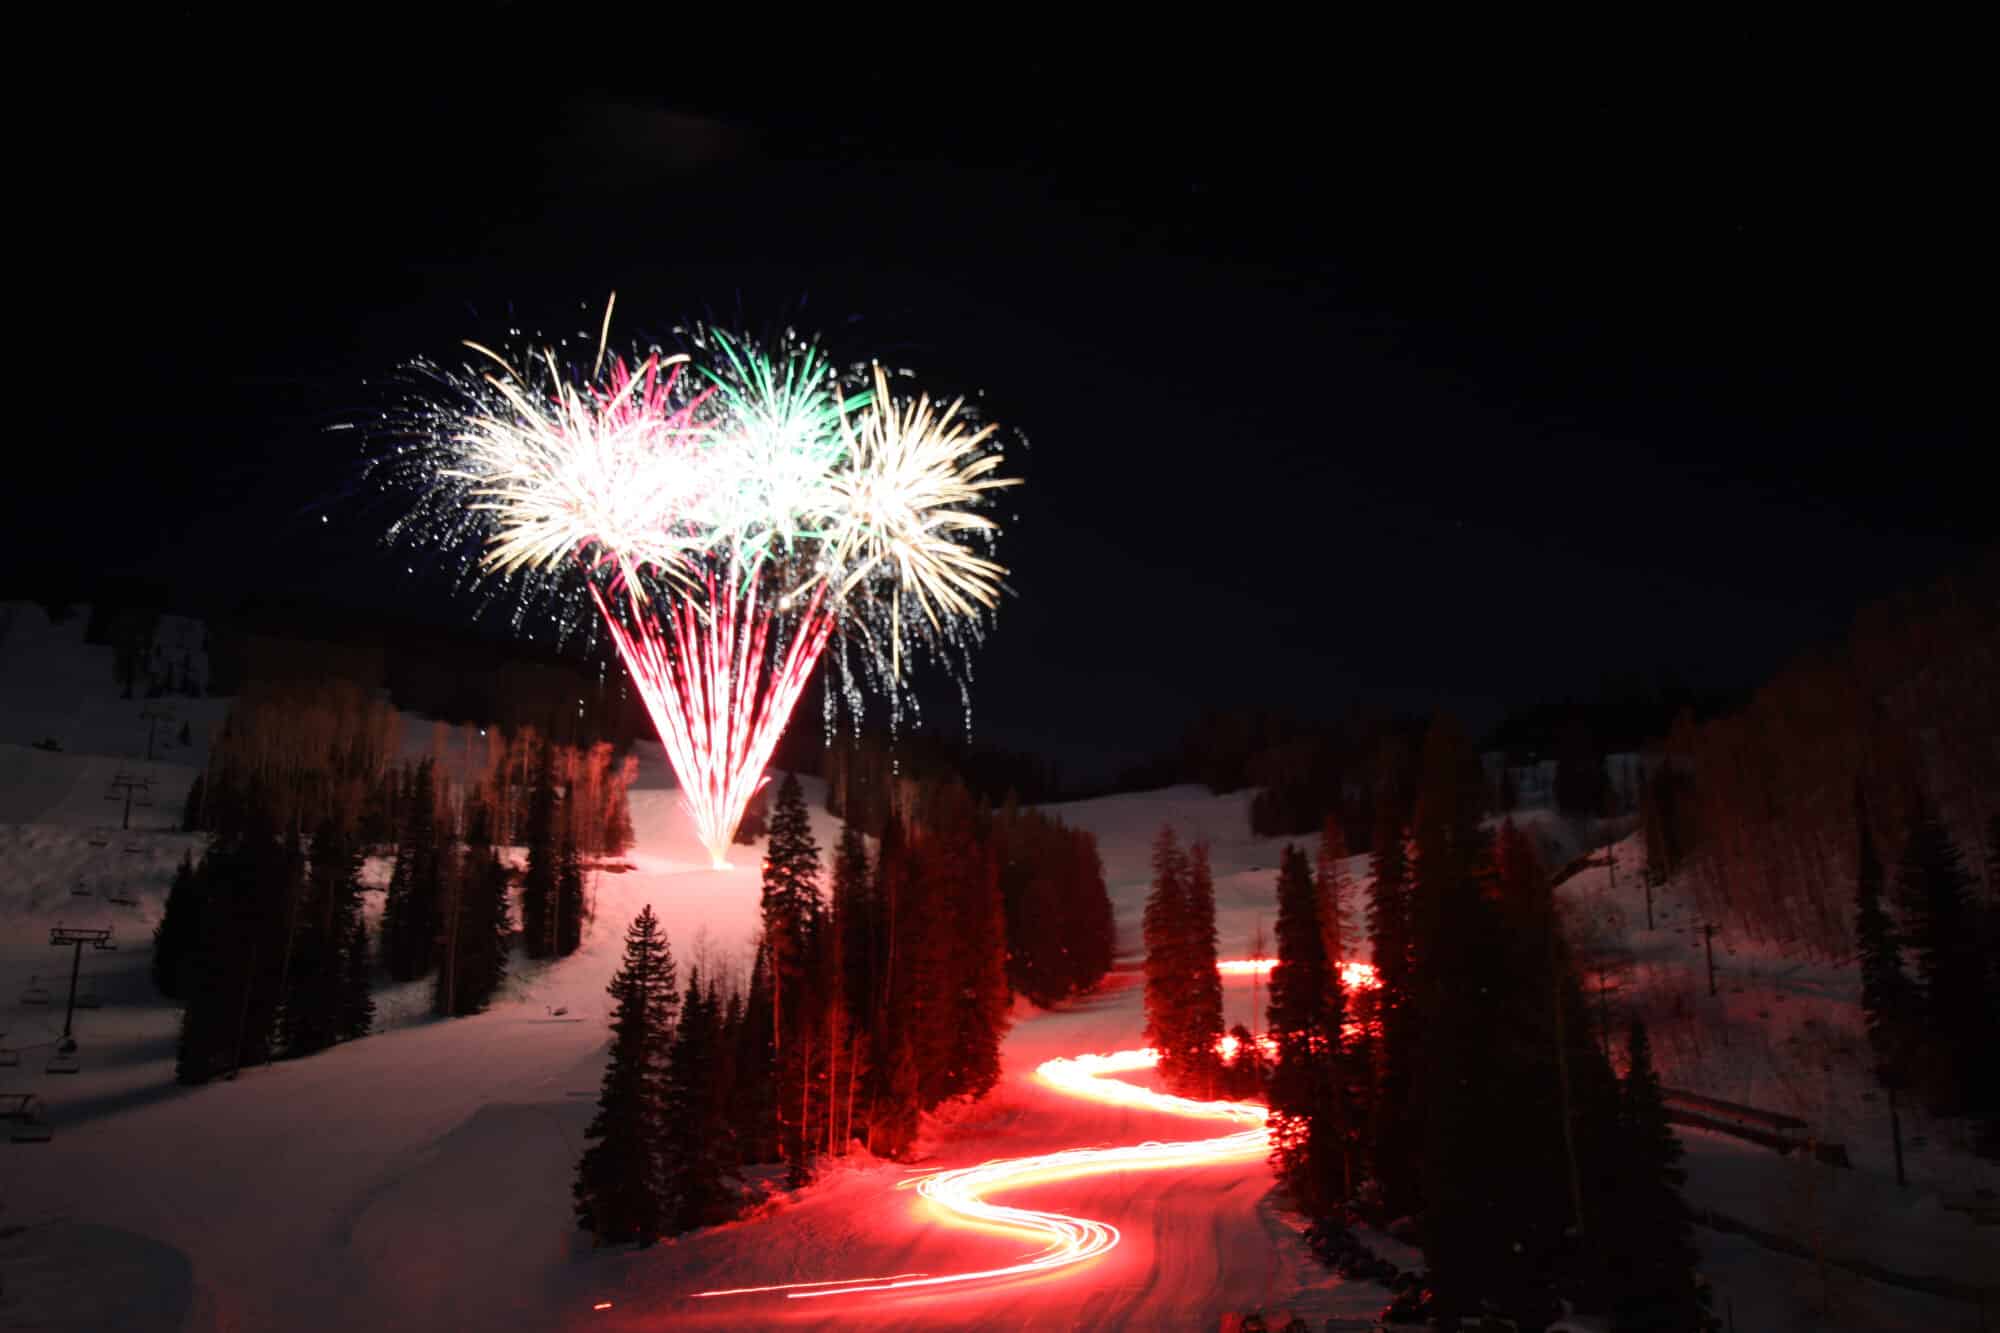 Torchlight parade winds down the mountain as fireworks light up the sky